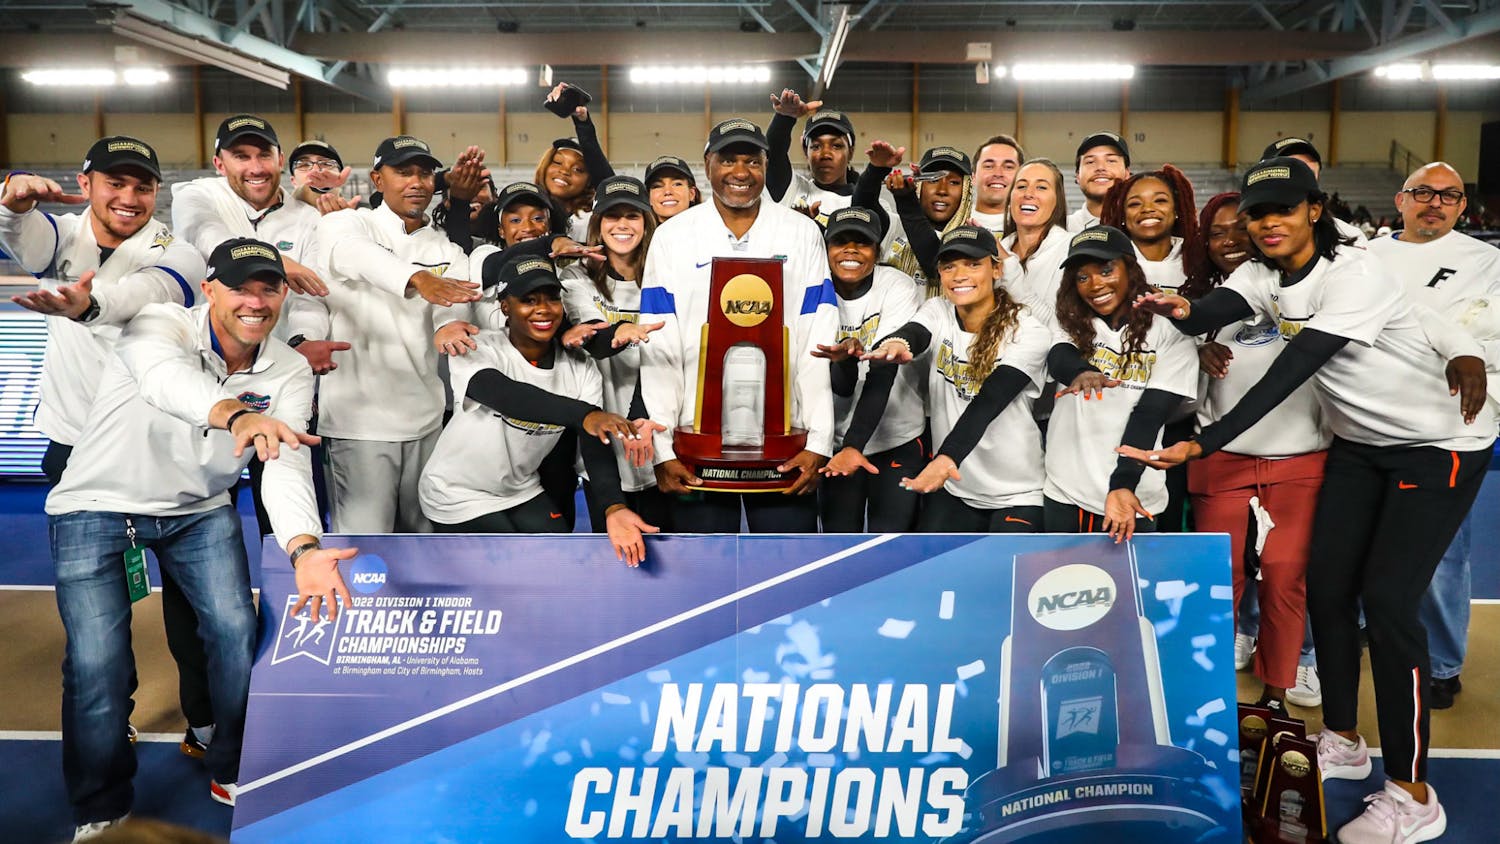 Florida women’s track team and head coach Mike Holloway raise the NCAA Indoor Championship trophy